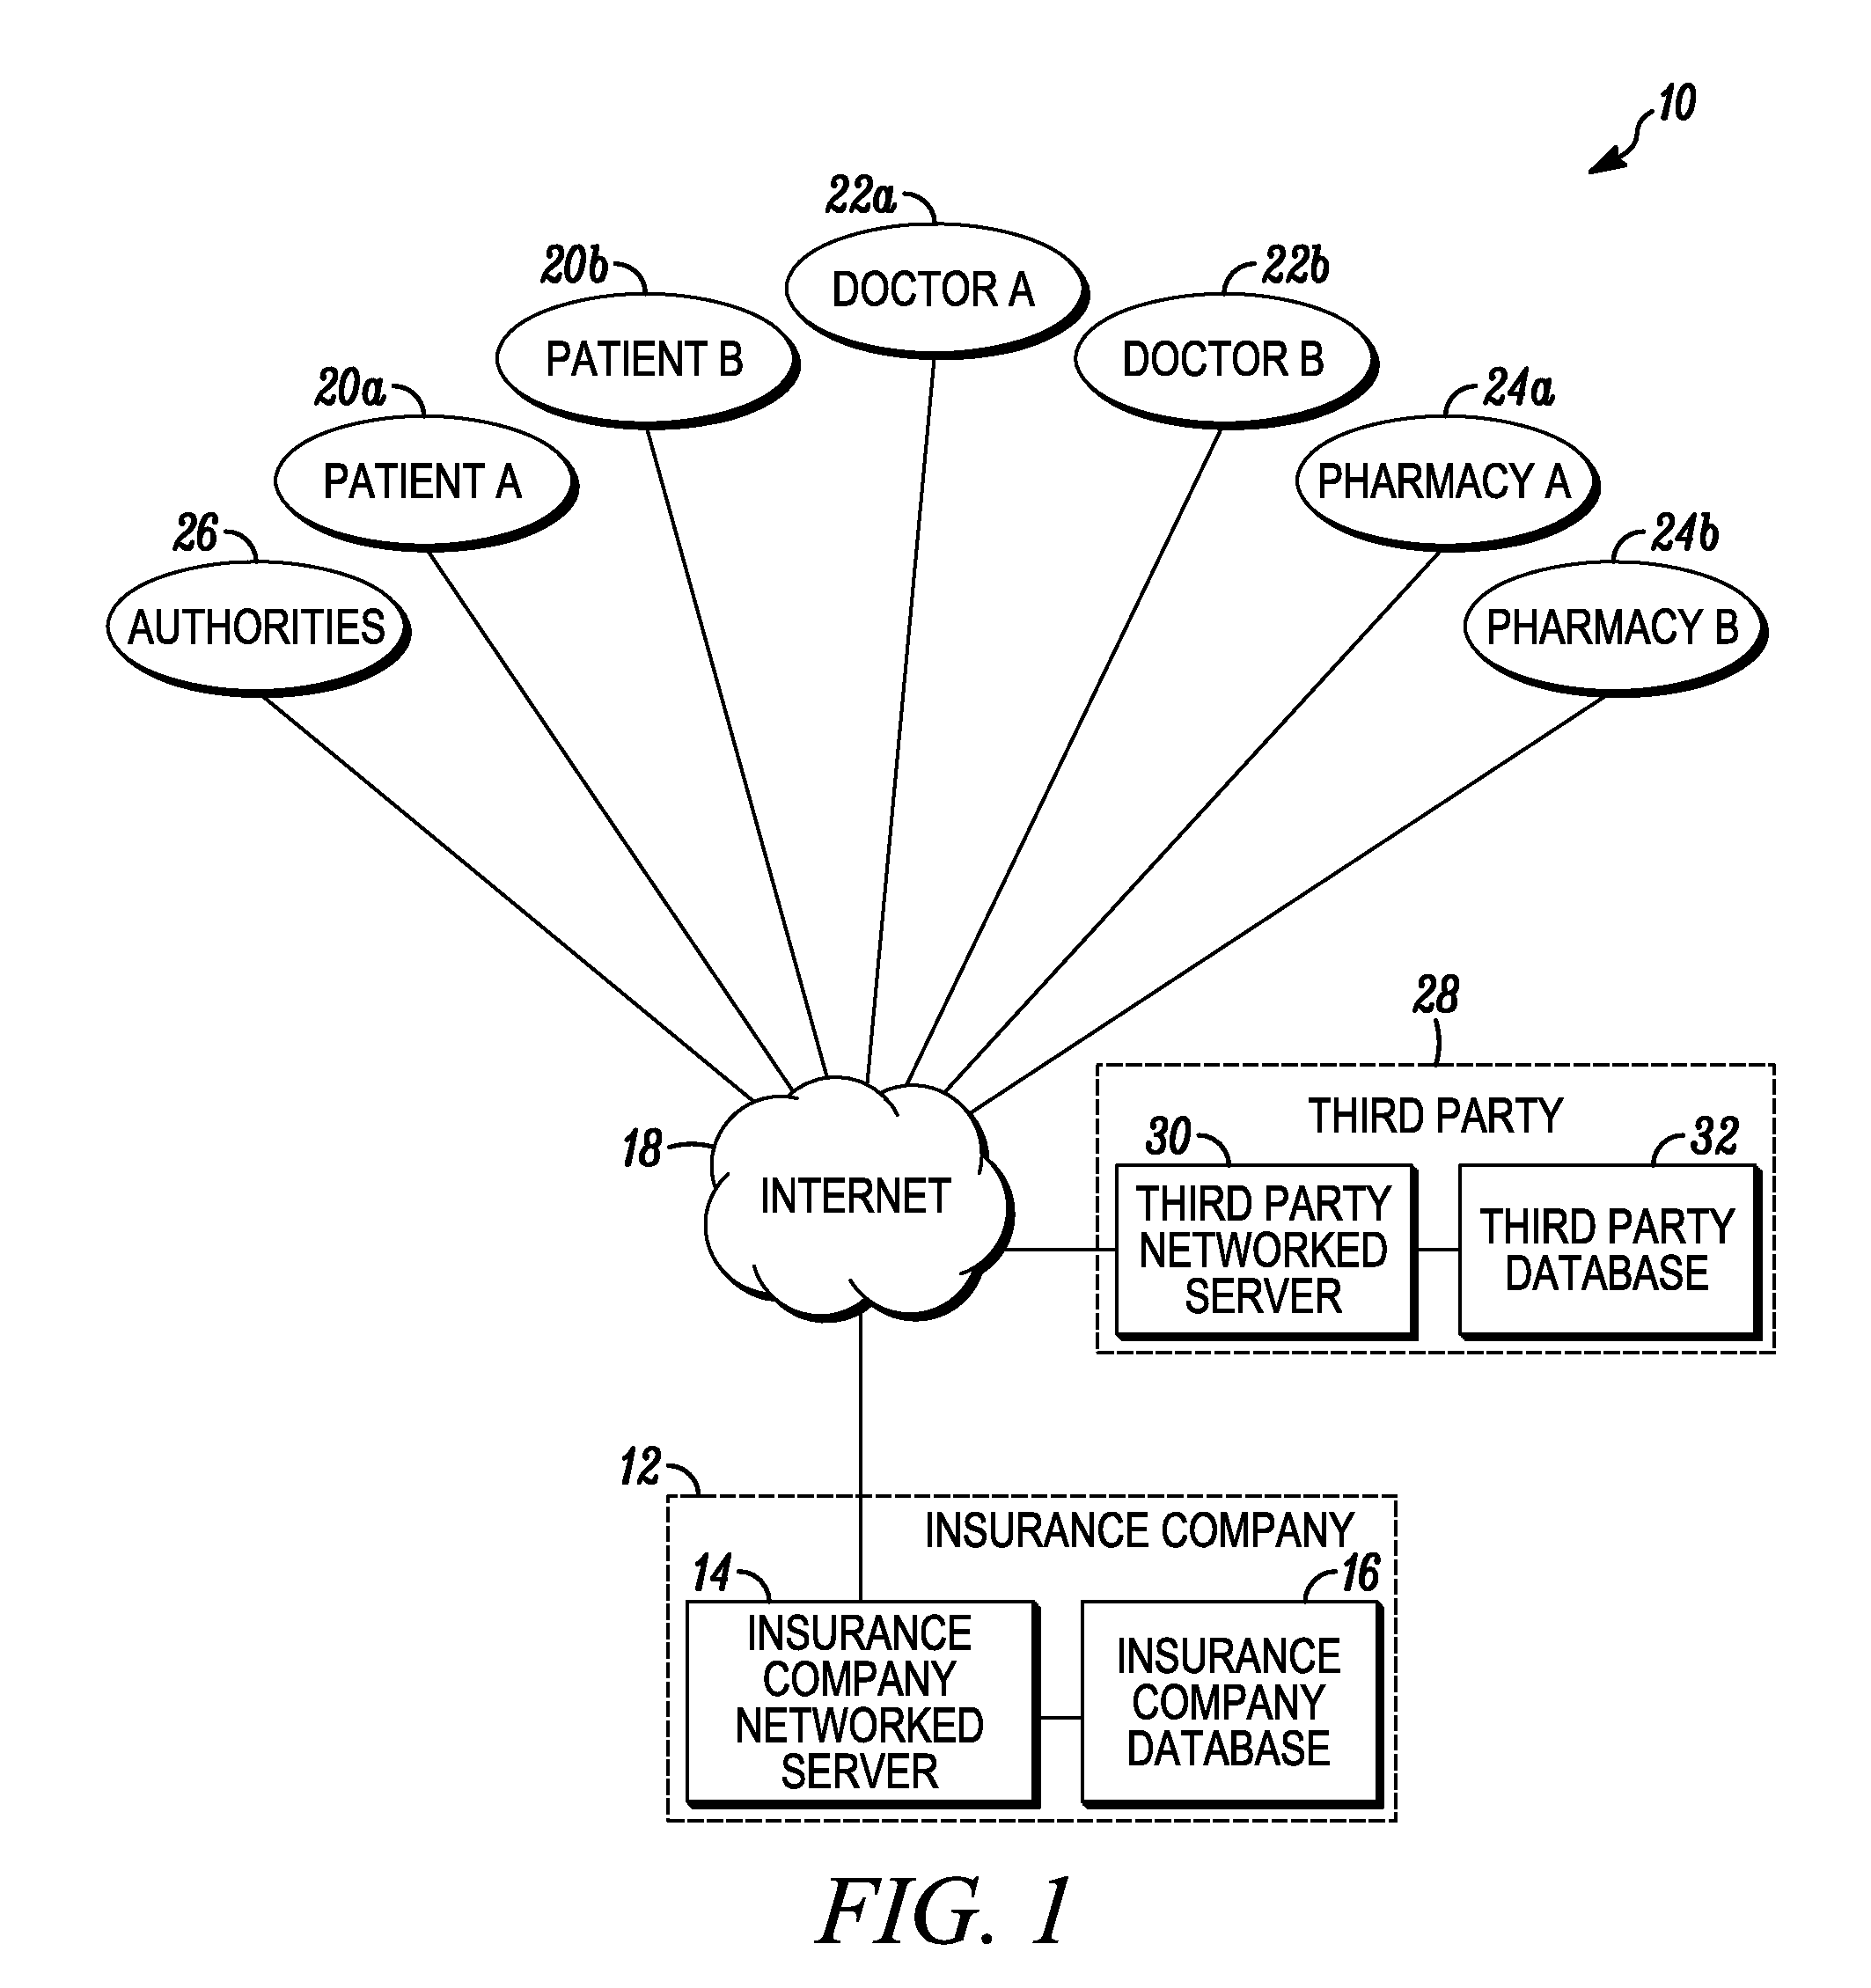 System and method for detecting drug fraud and abuse